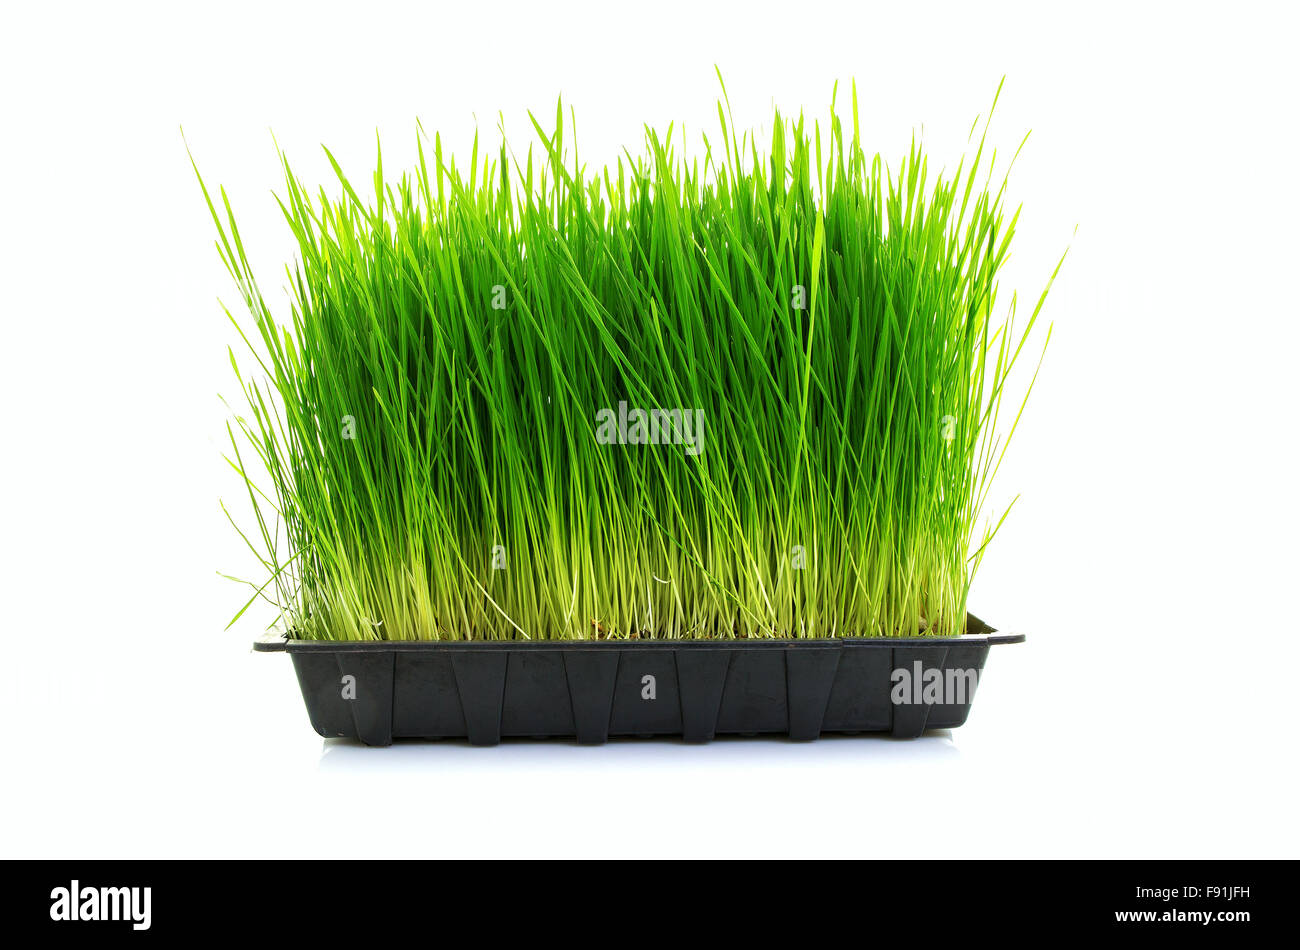 Nutritious Tray Of Homegrown Wheatgrass on a white background Stock Photo